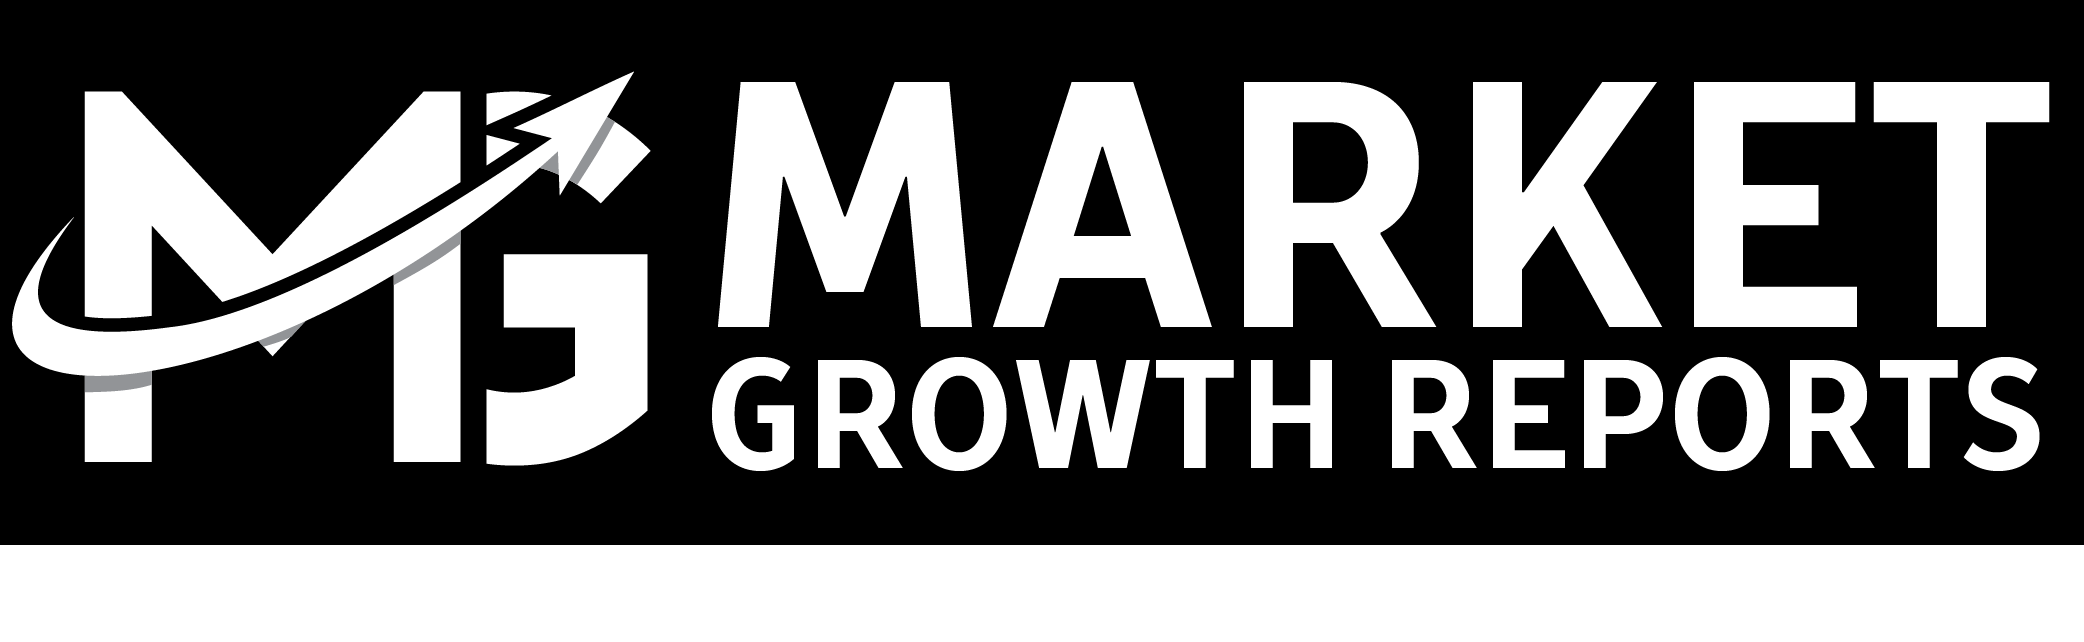 Hair Growth Products Market Trends & Forecast to 2026- Industry Analysis by Geographical Regions, Type, Trends, Growth and Application by Market Growth Reports